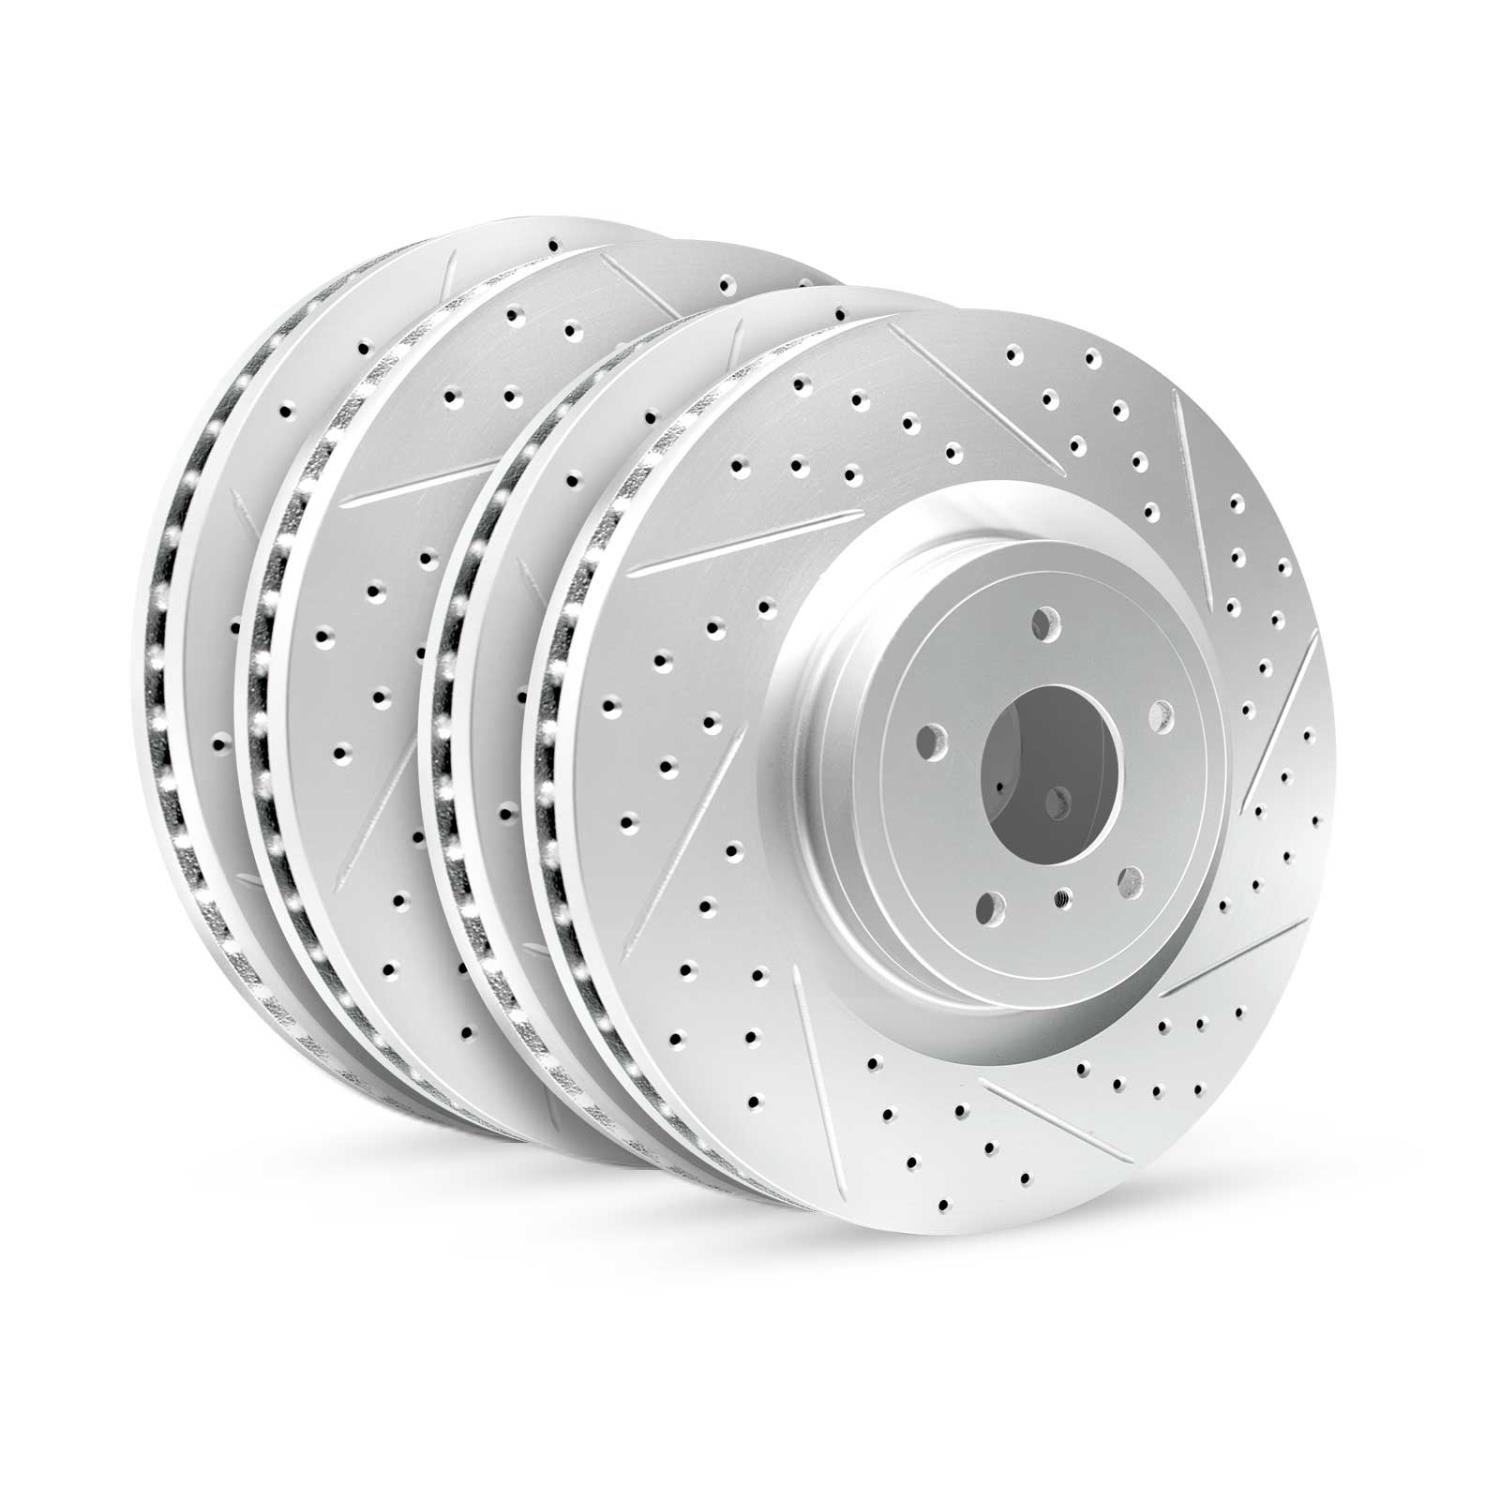 GEO-Carbon Drilled/Slotted Rotors, 1990-2001 Acura/Honda, Position: Front/Rear